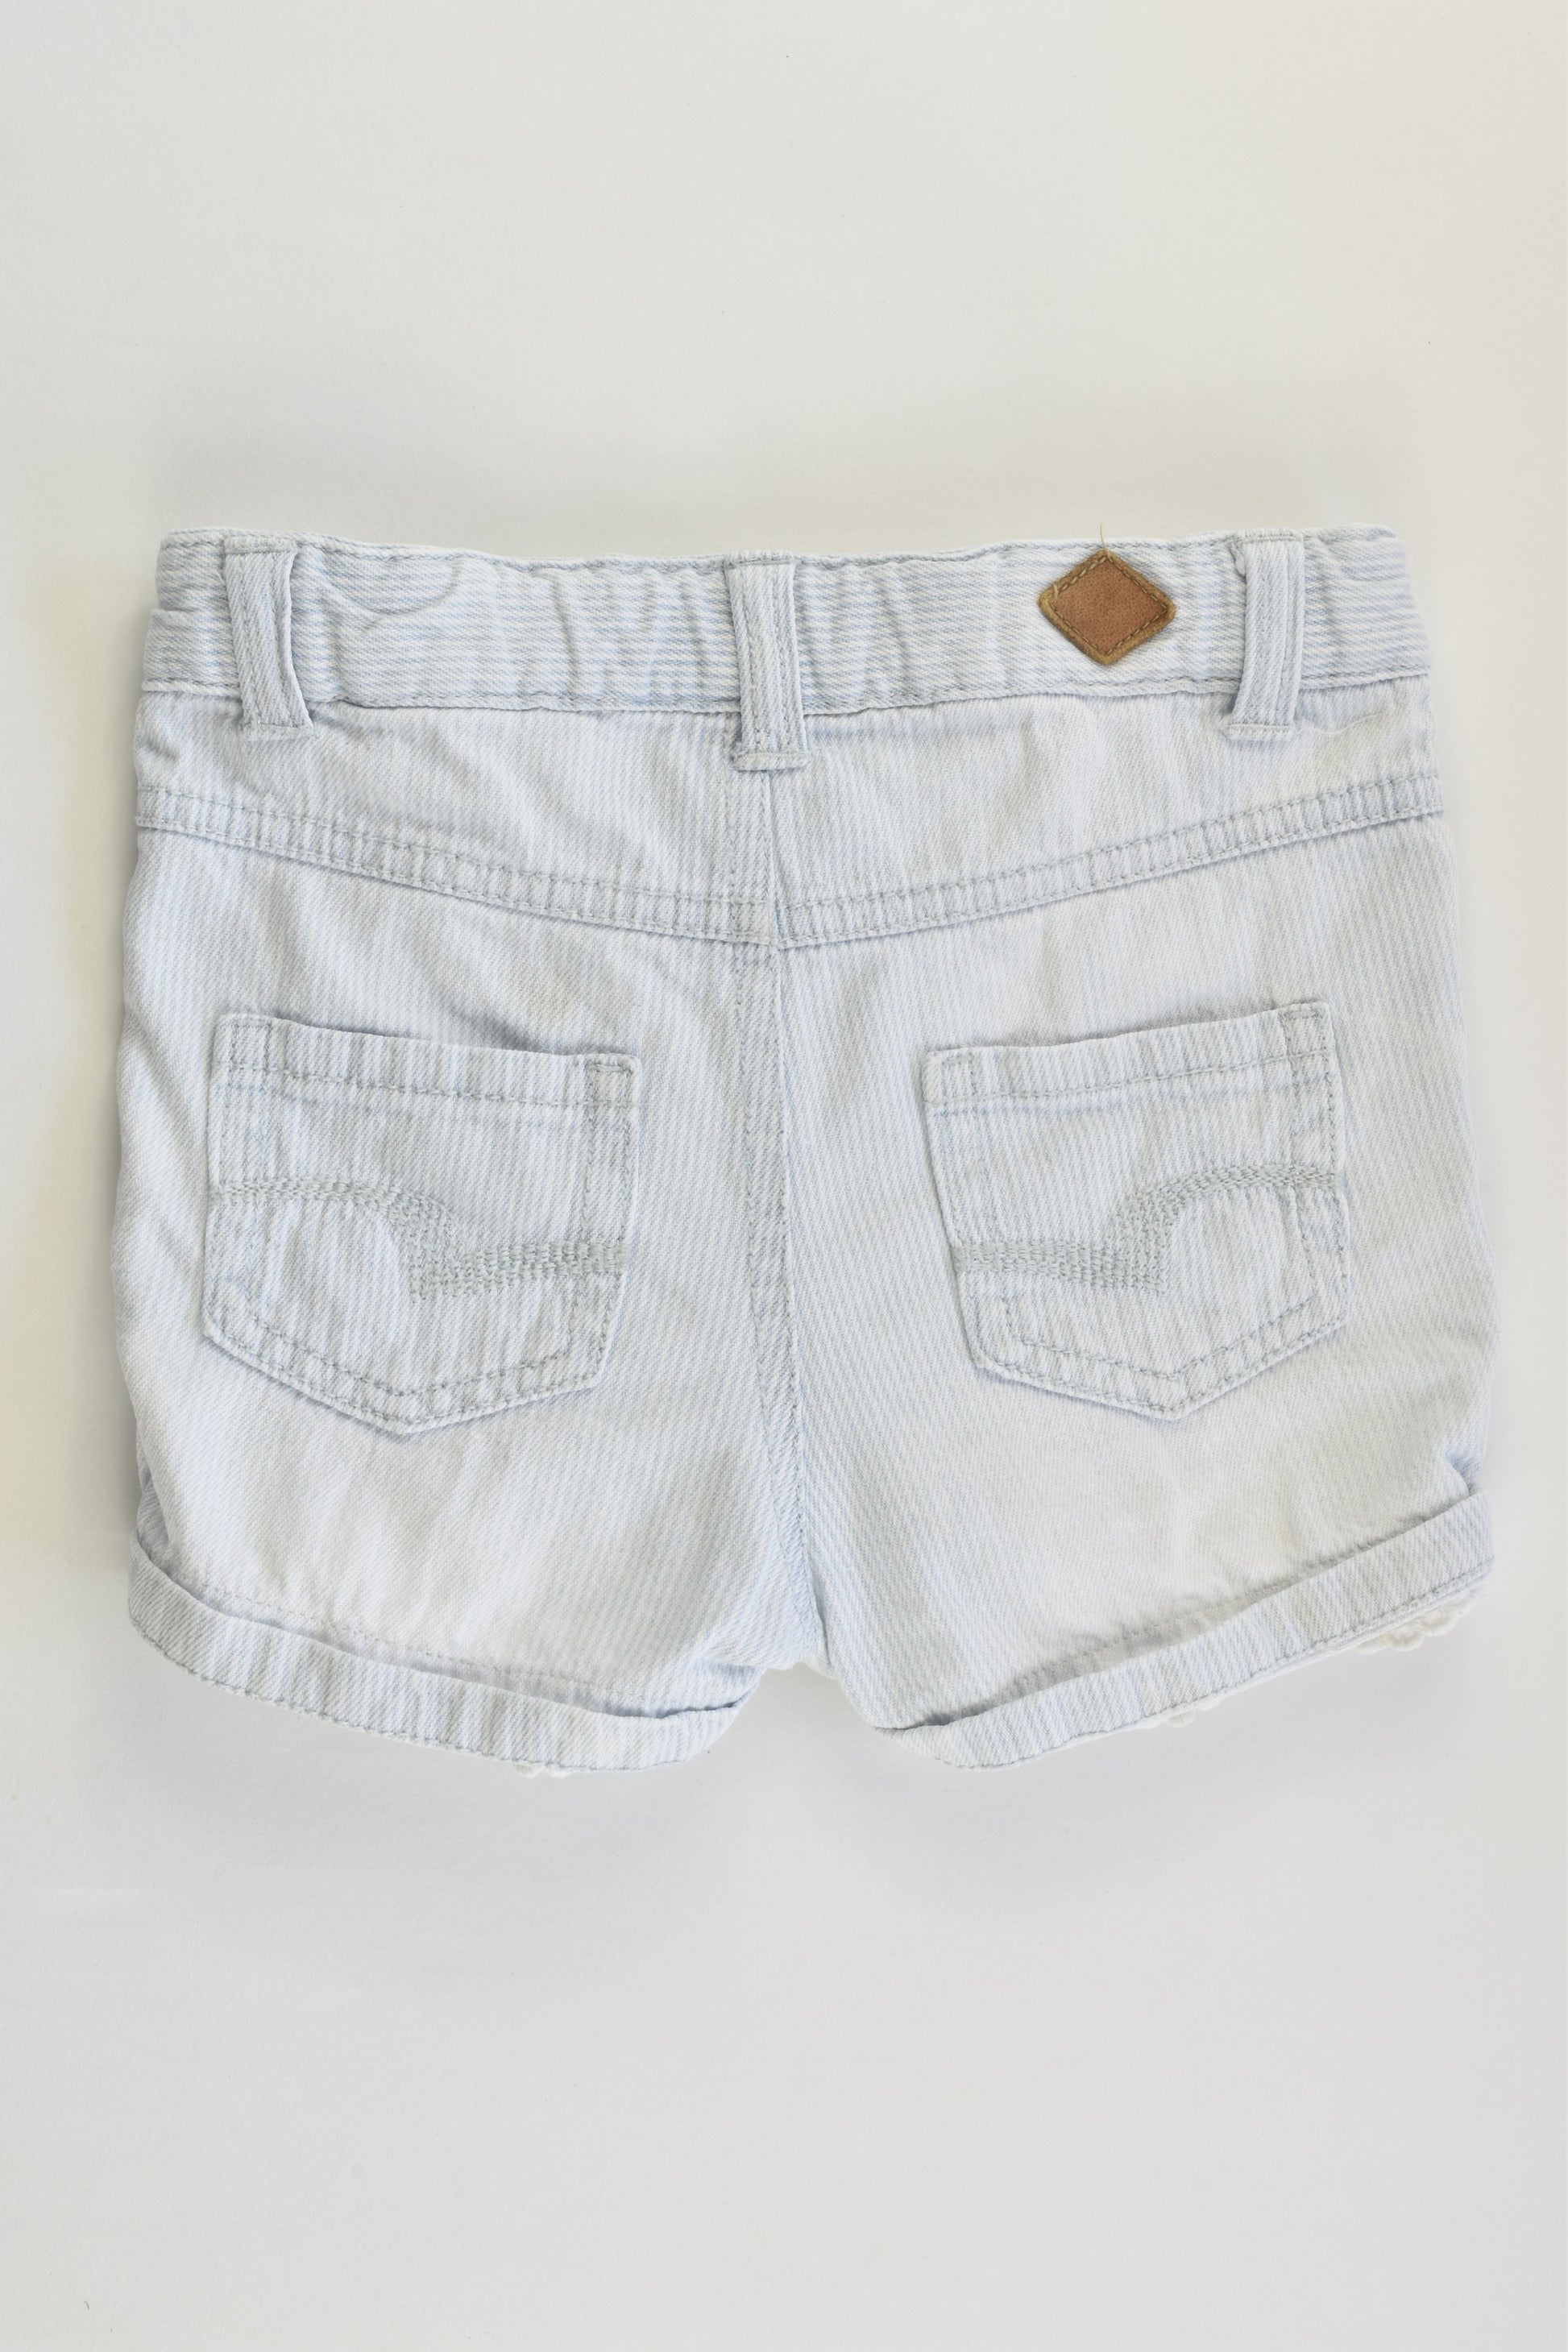 Lee Cooper Size 1 Denim Shorts with Lace Details